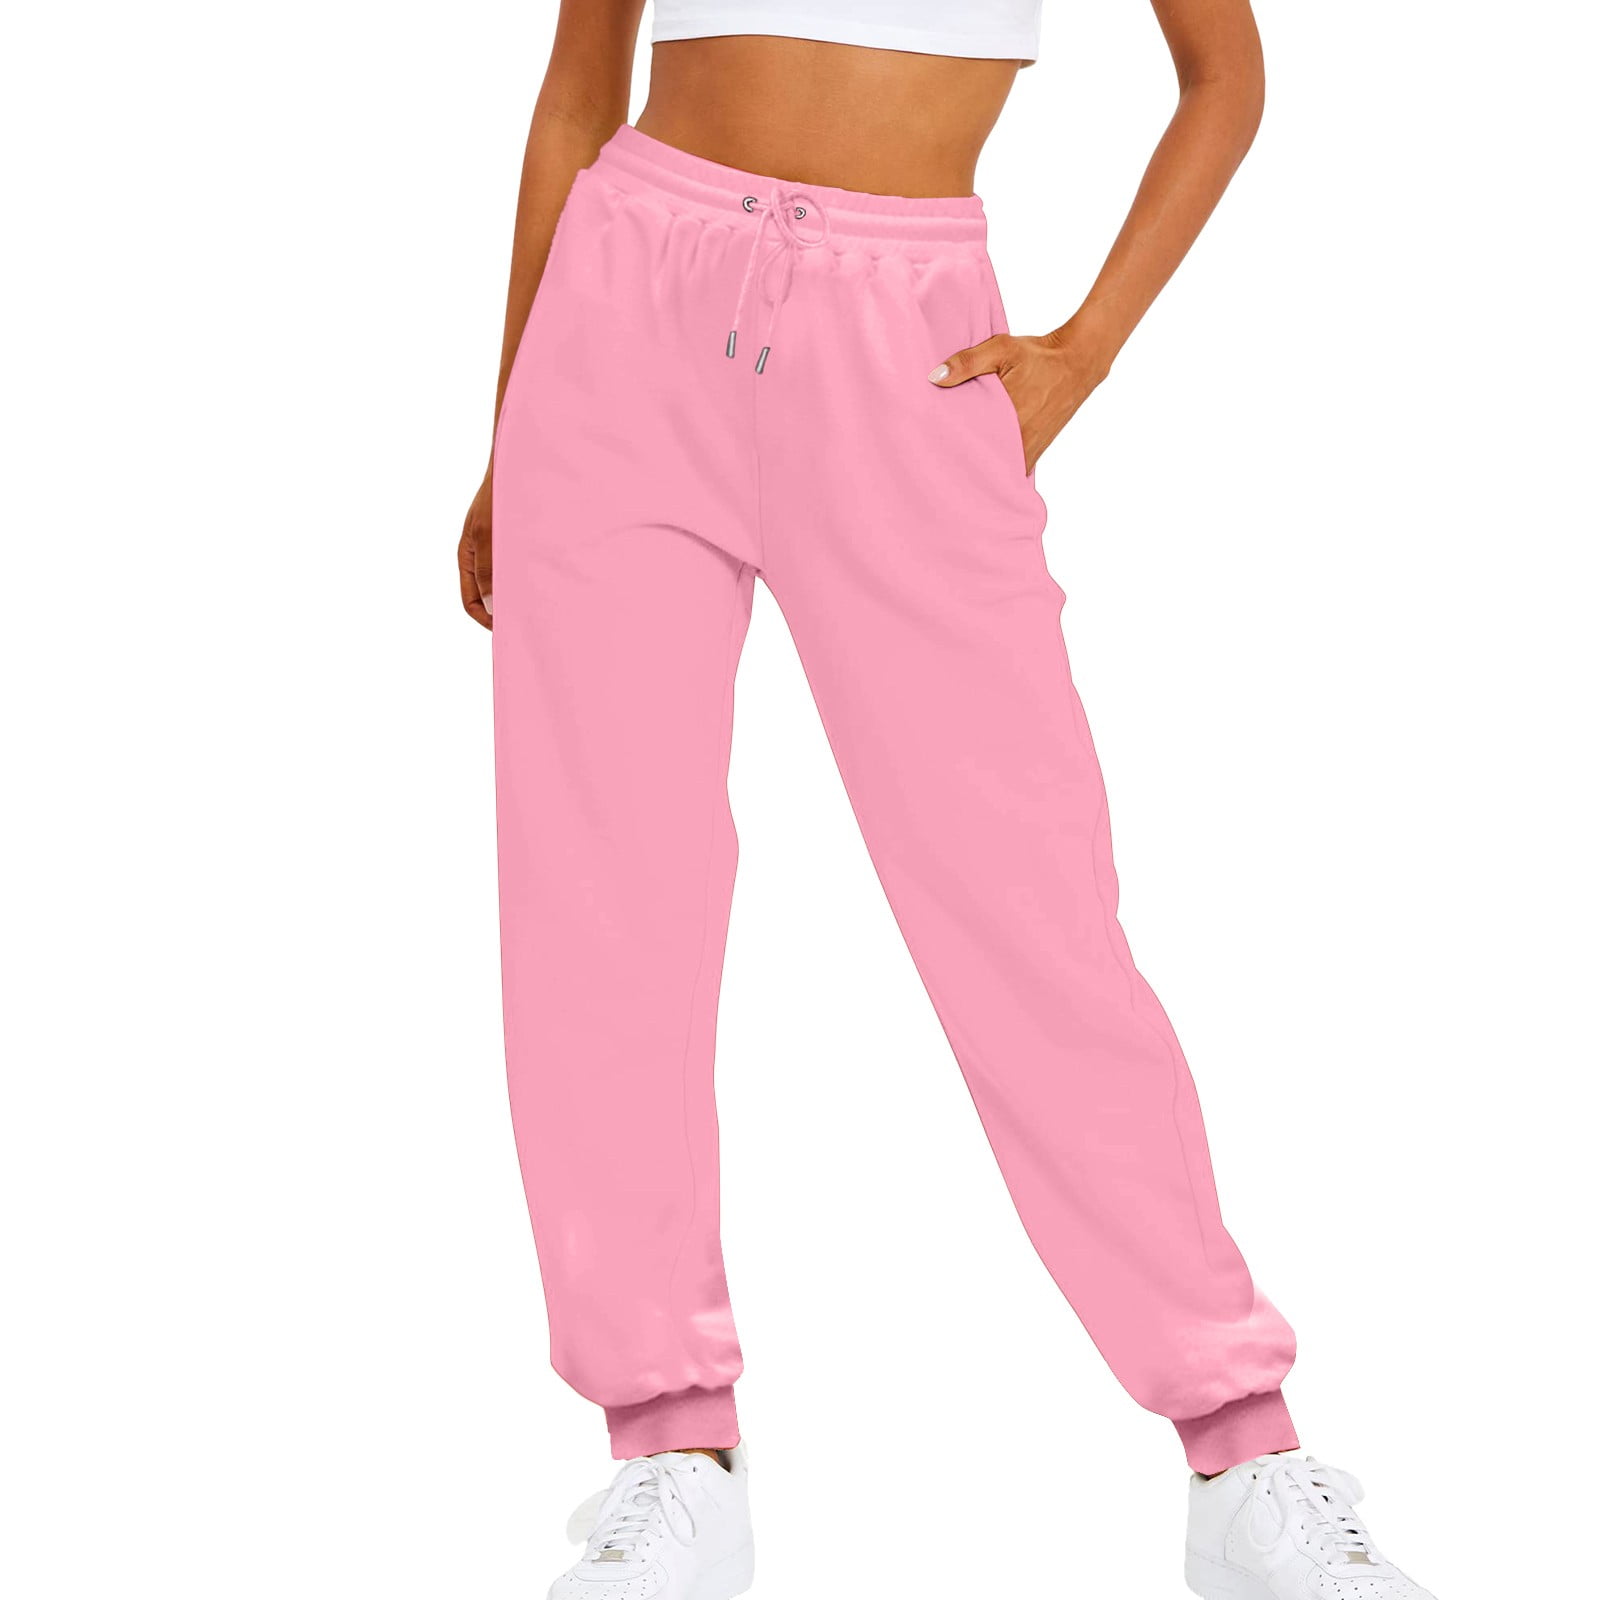 Sexy Fleece Drawstring Sweatpants For Women High Waist Cargo Leggings In  Small Sizes XS 3XL For Fall And Winter Style 258C From Uikta, $22.39